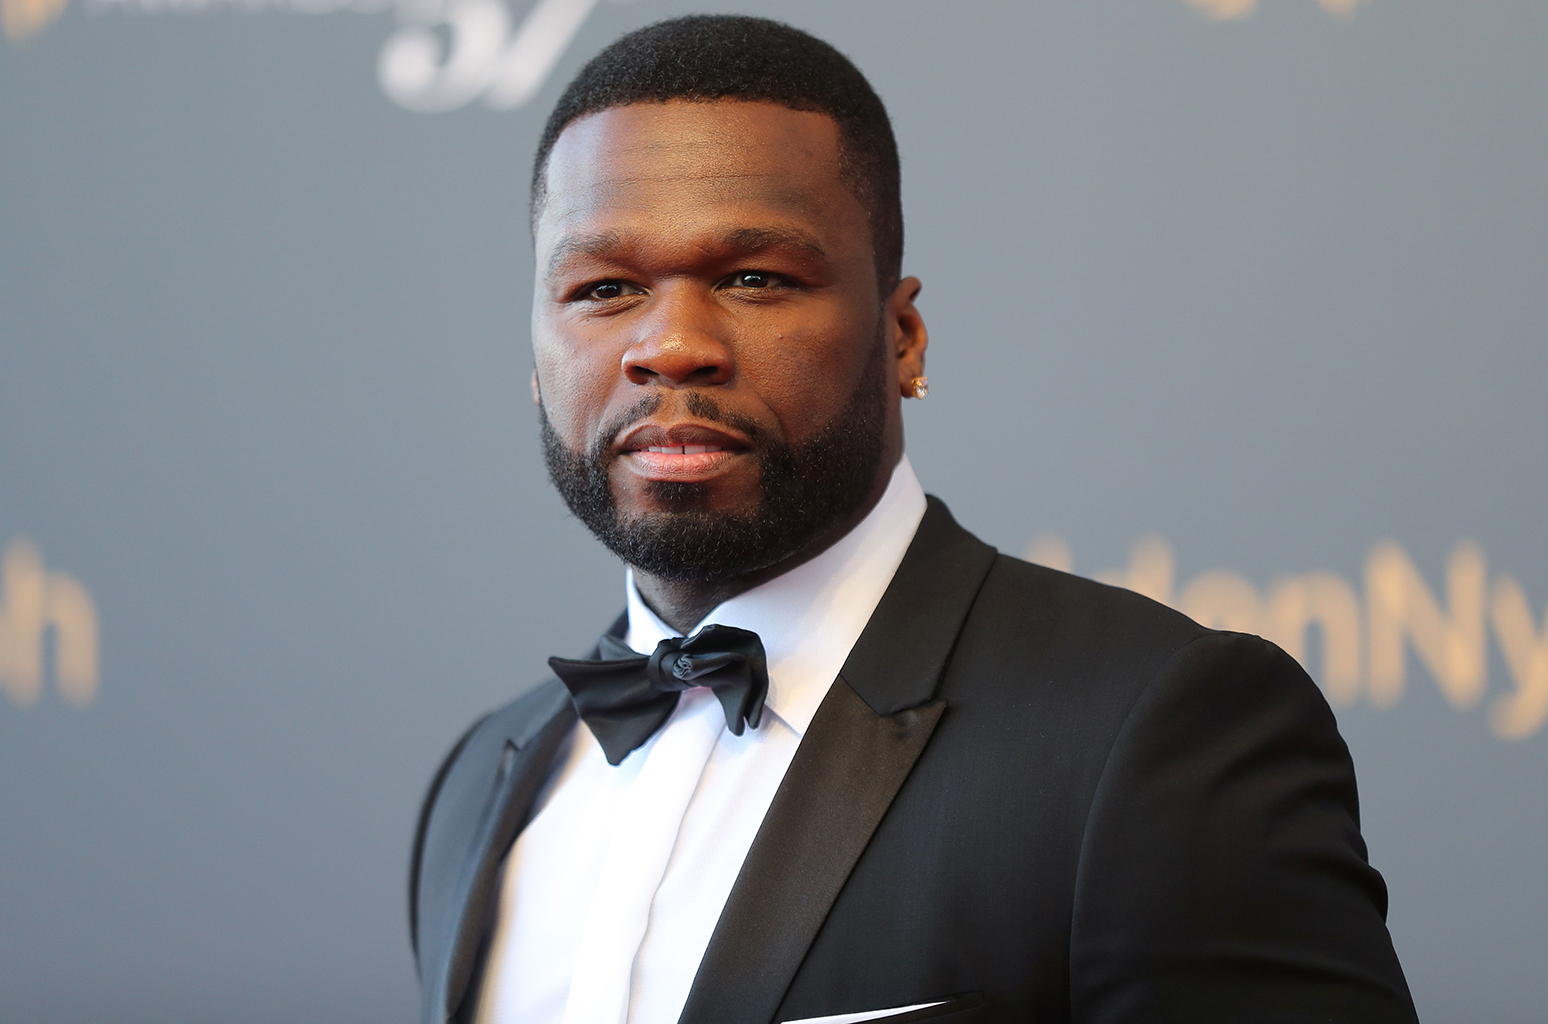 50 Cent Goes North After His Ex, Vivica Fox Described Their Sex Life as ‘PG-13-Rated’